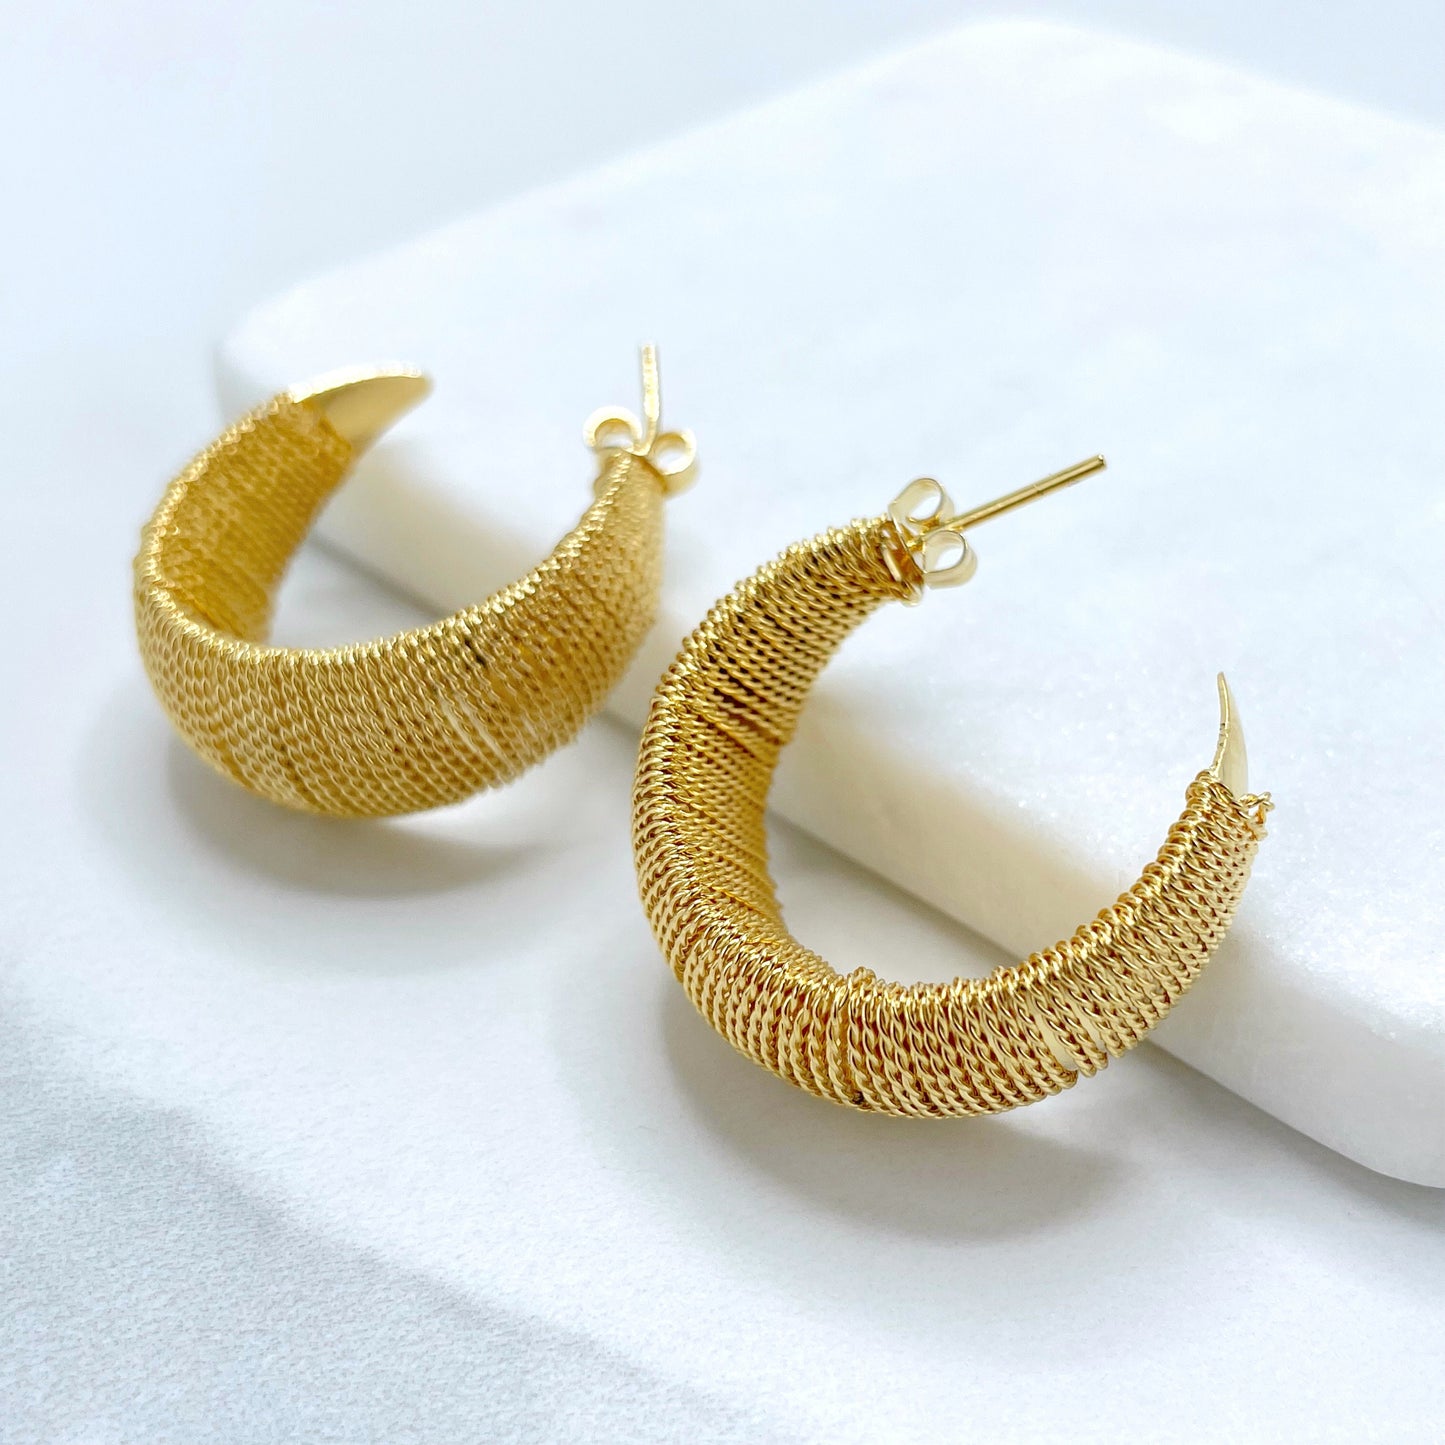 18k Gold Filled  31mm C-Hoop Earrings, 15mm Thickness, Wholesale Jewelry Making Supplies